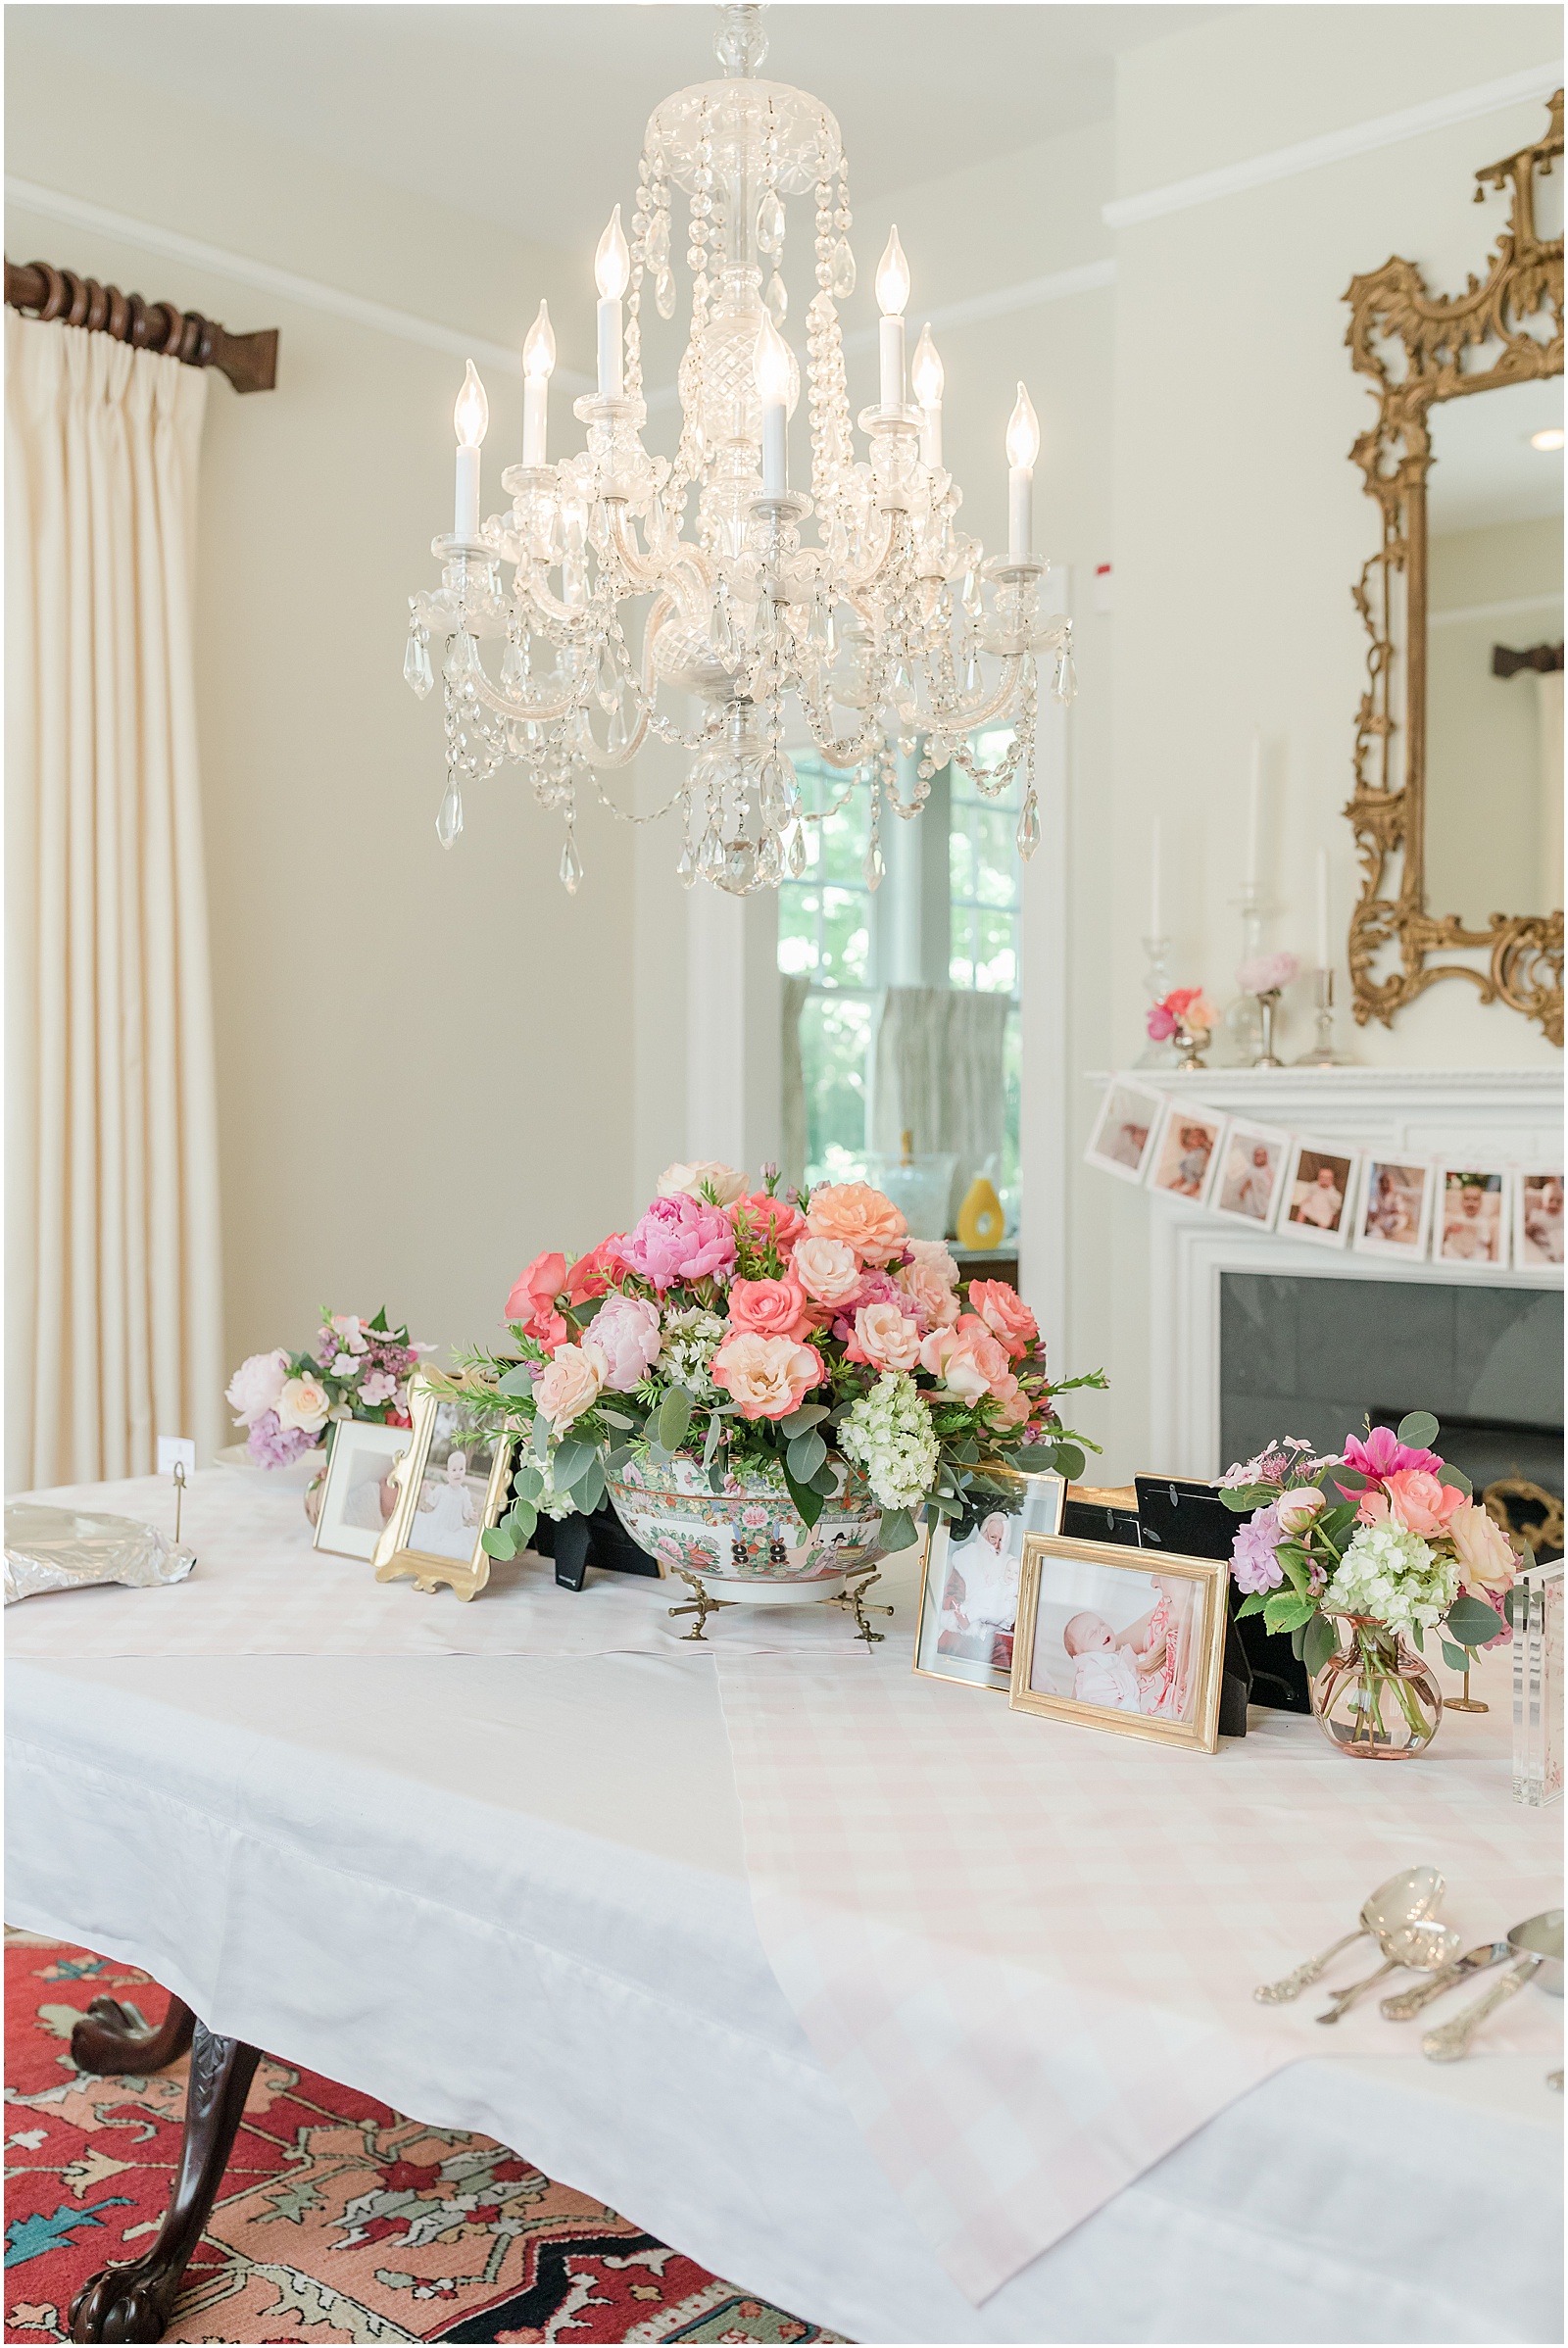 Greenville first birthday photographer captures classic traditional first birthday decor